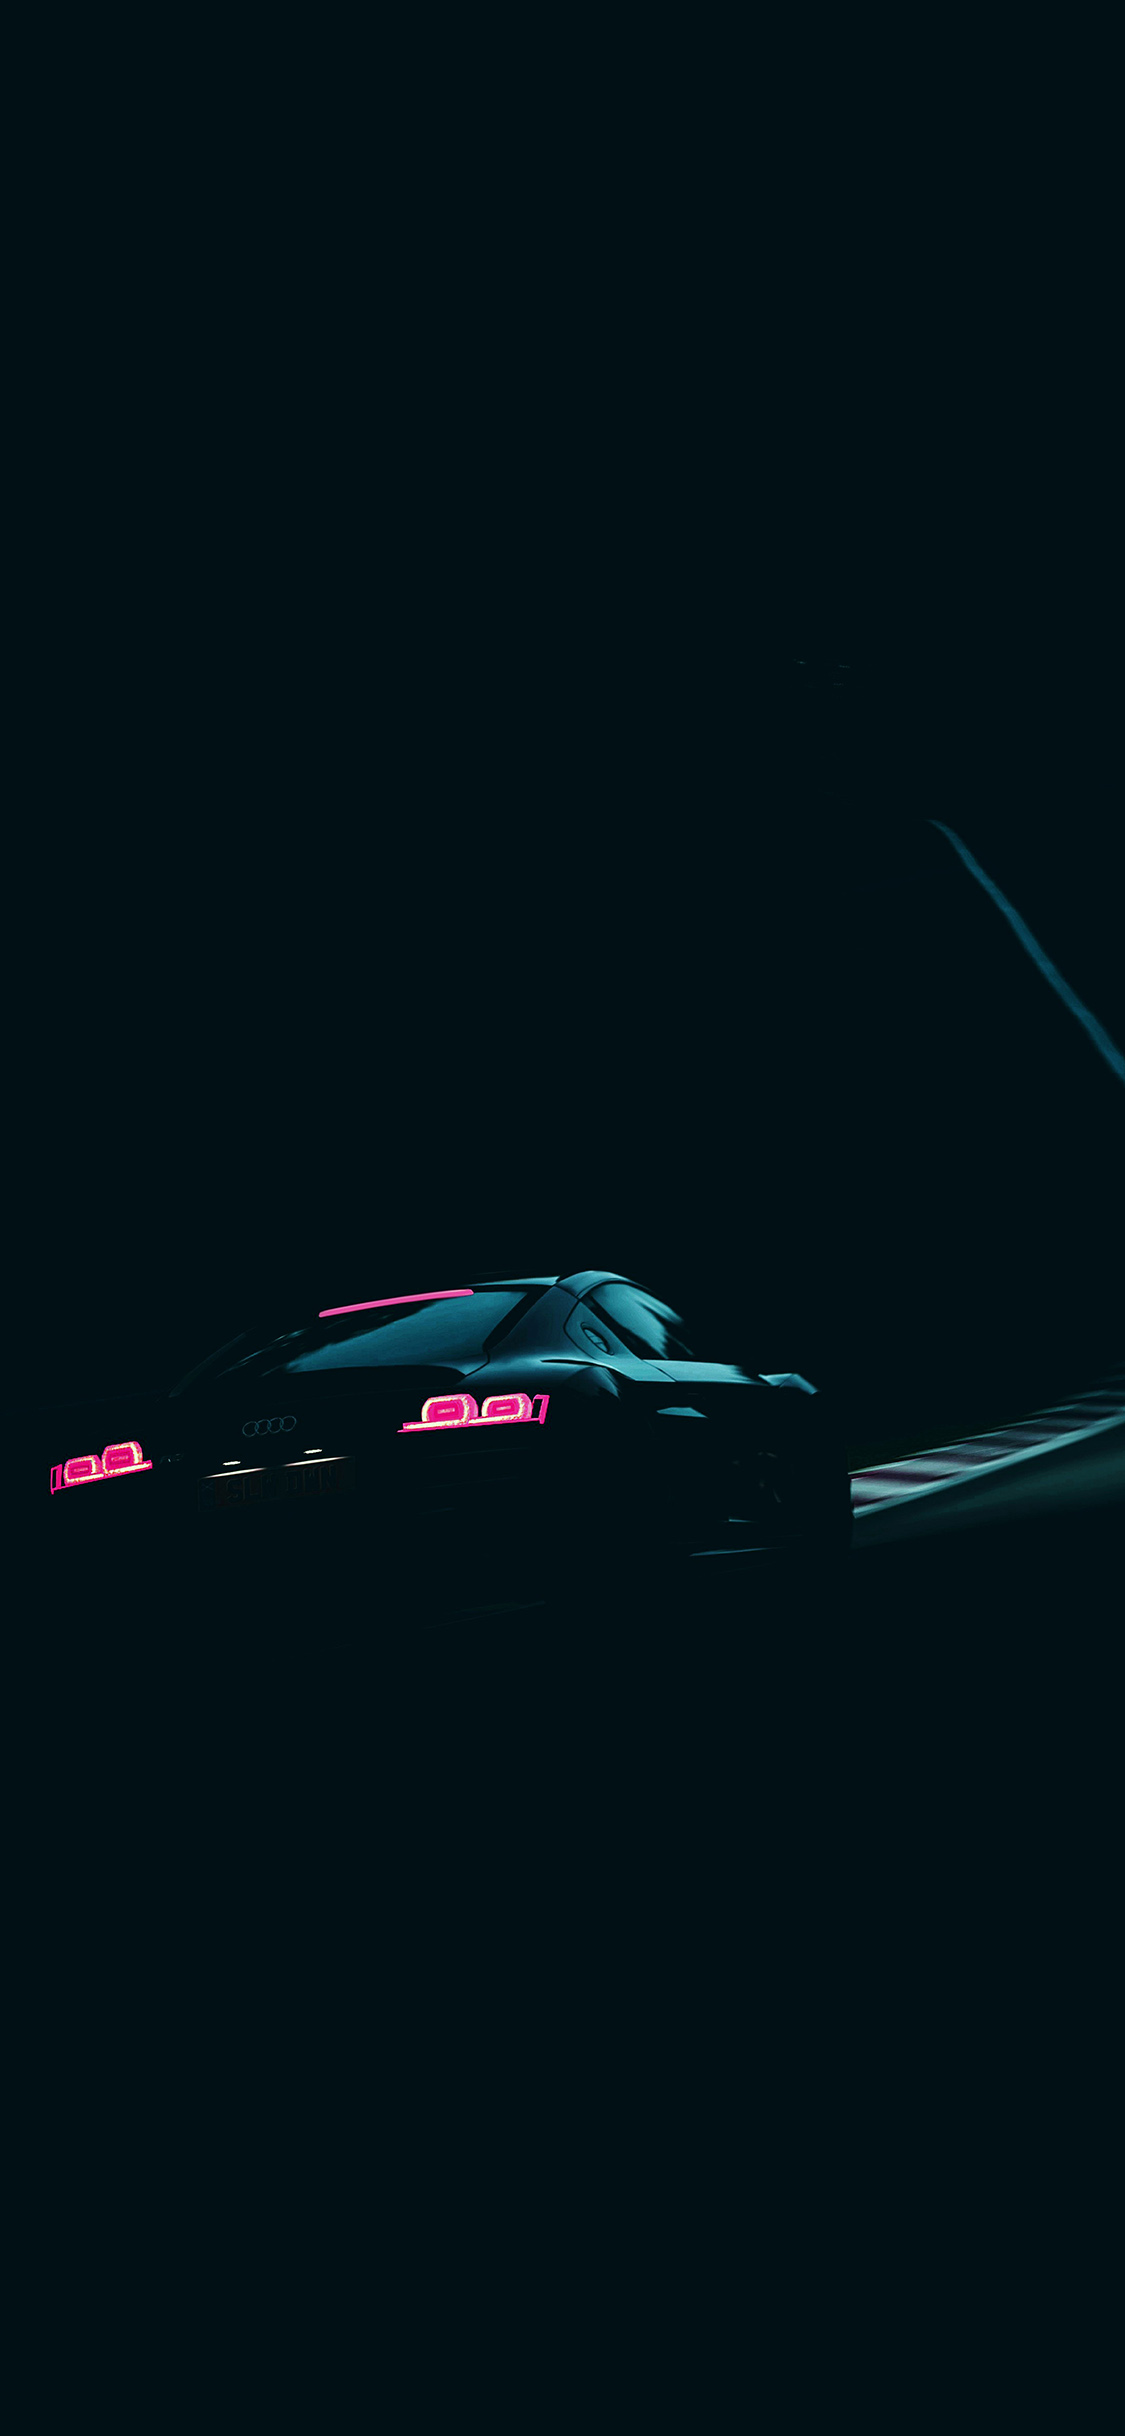 Cars Wallpapers For Iphone X Iphonexpapers - 4k Wallpaper For Iphone Xs Max  - 1125x2436 Wallpaper 